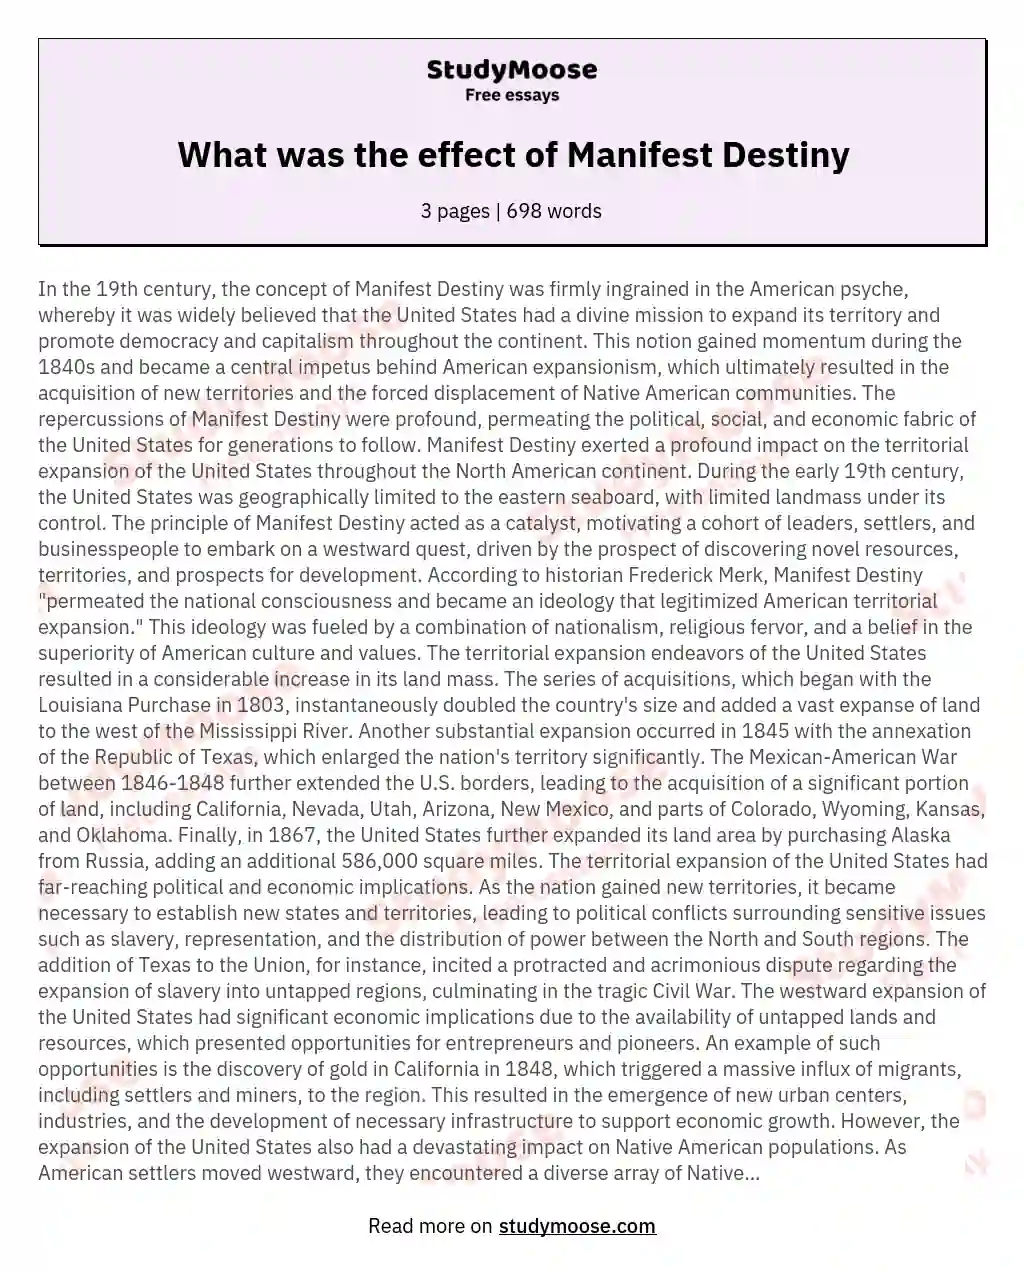 What was the effect of Manifest Destiny essay